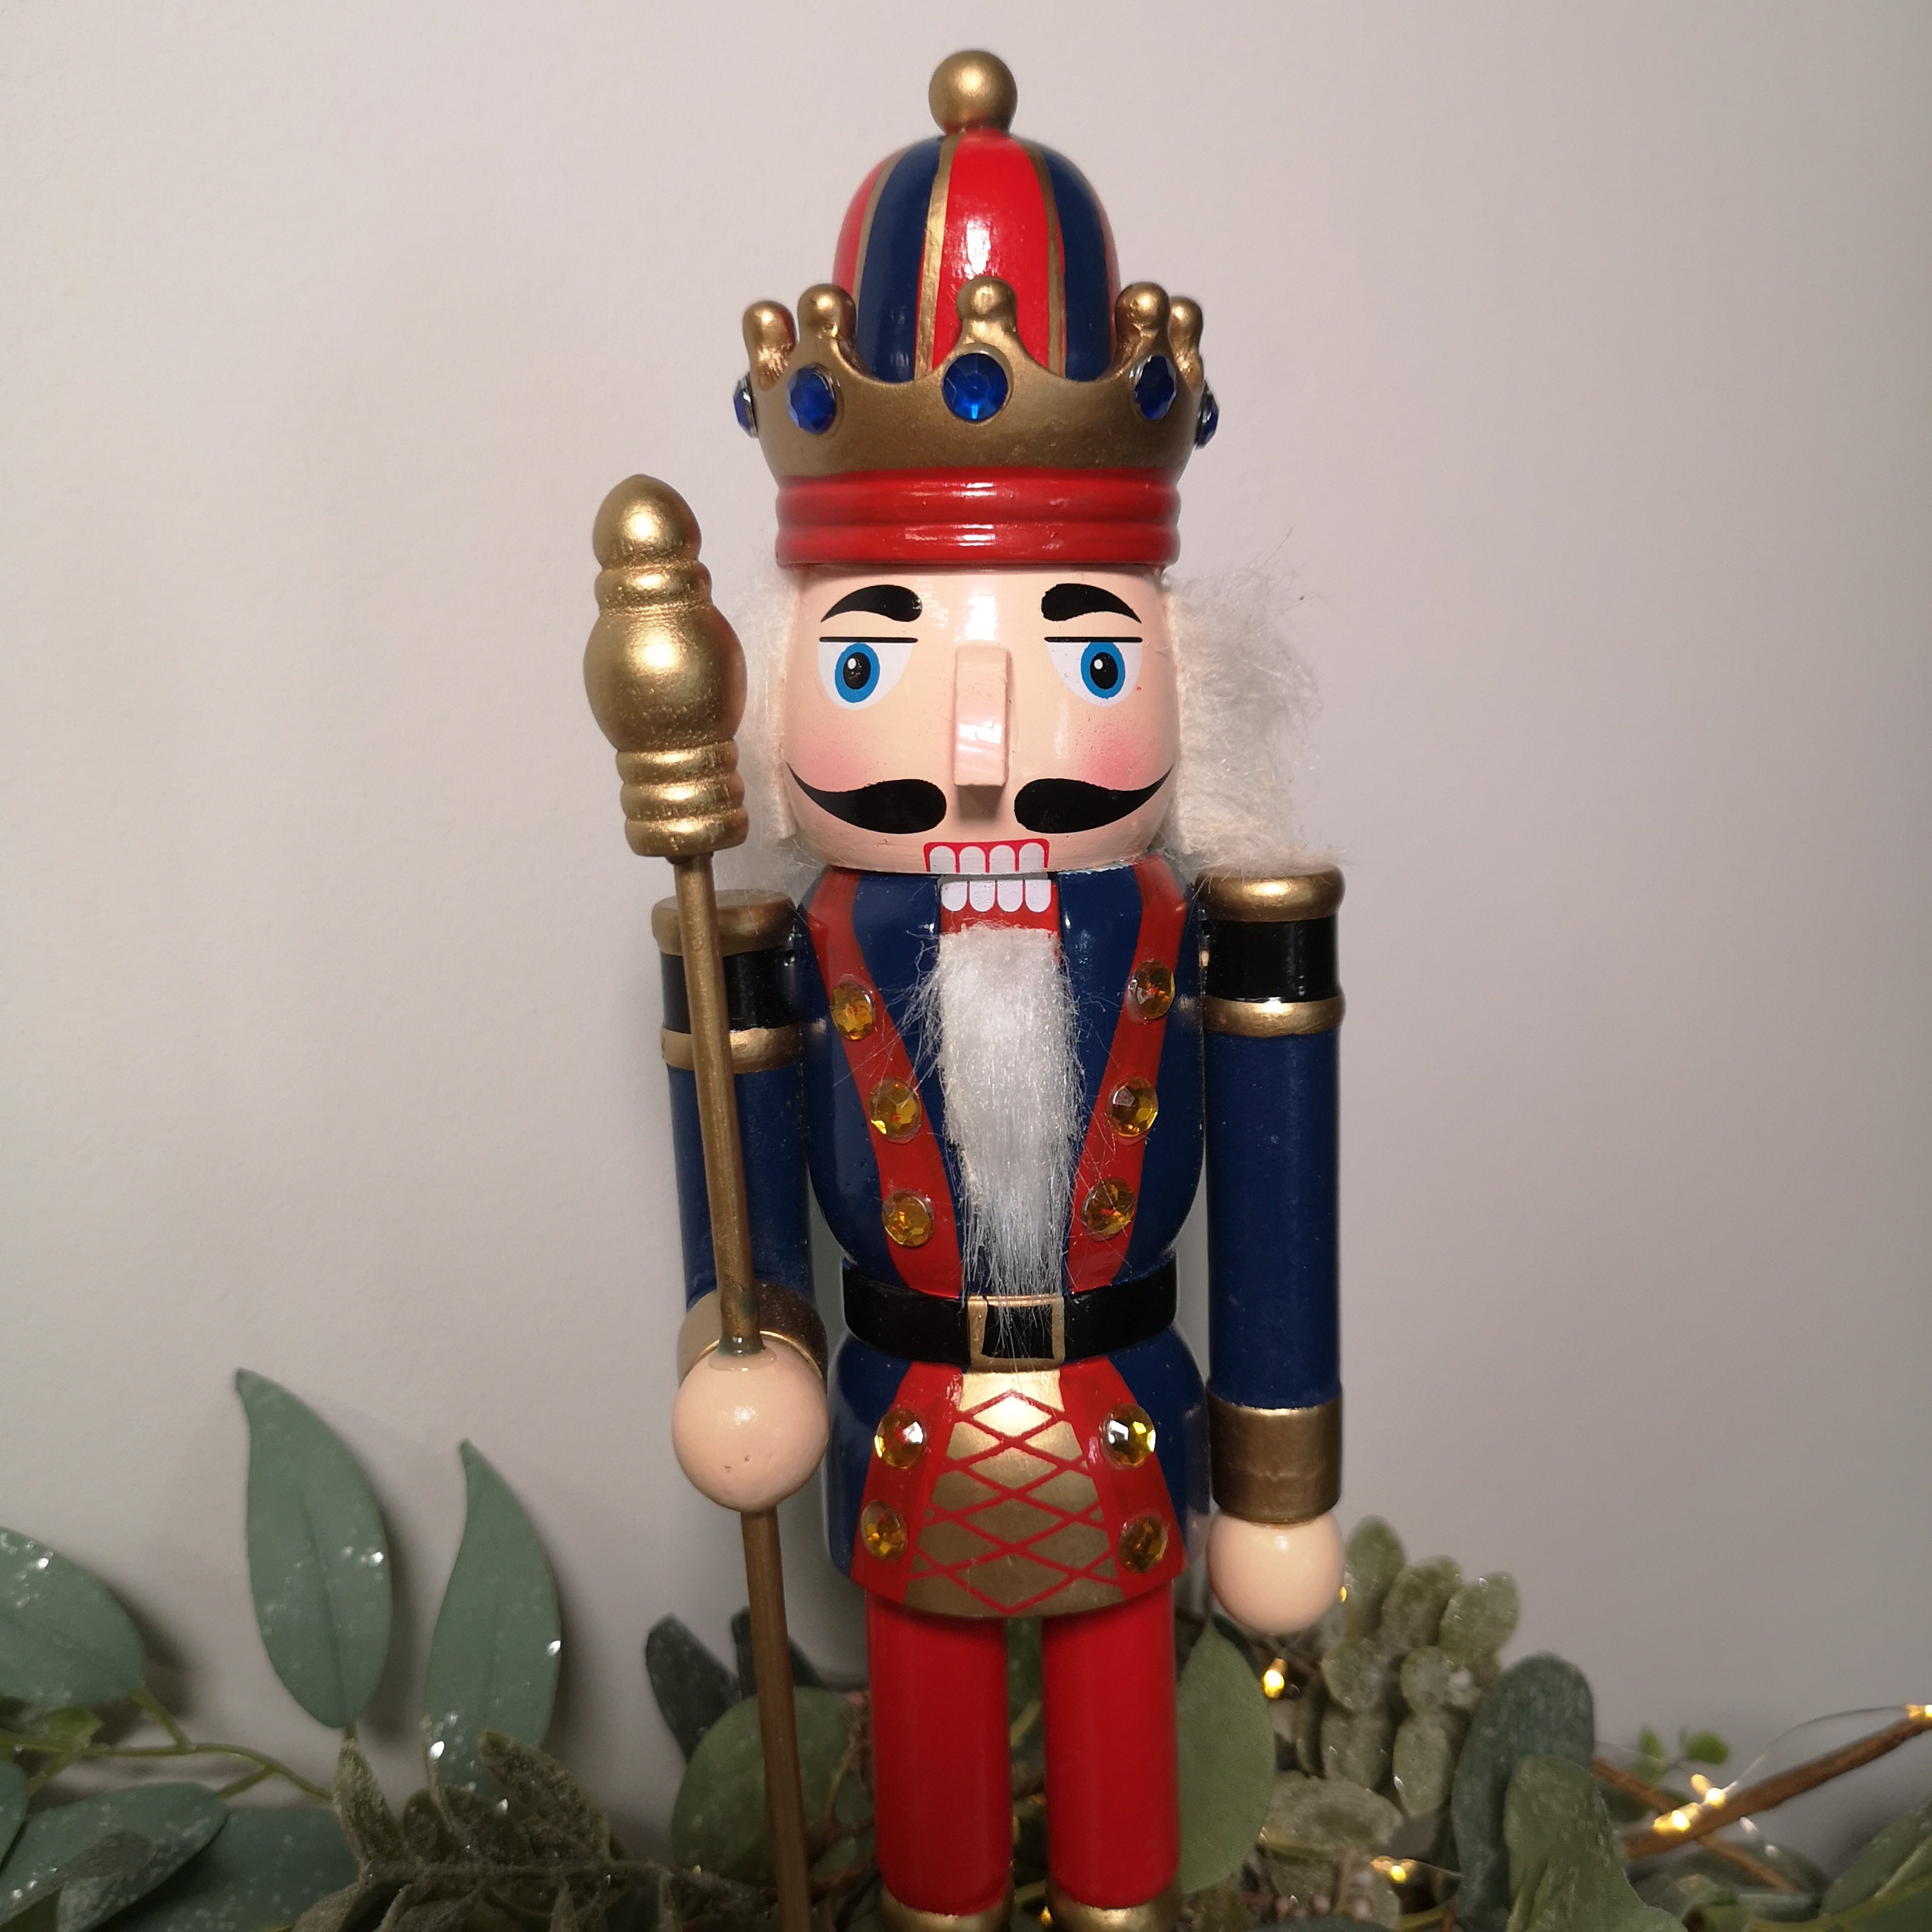 30cm Wooden Christmas Nutcracker Soldier Decoration with Blue Body